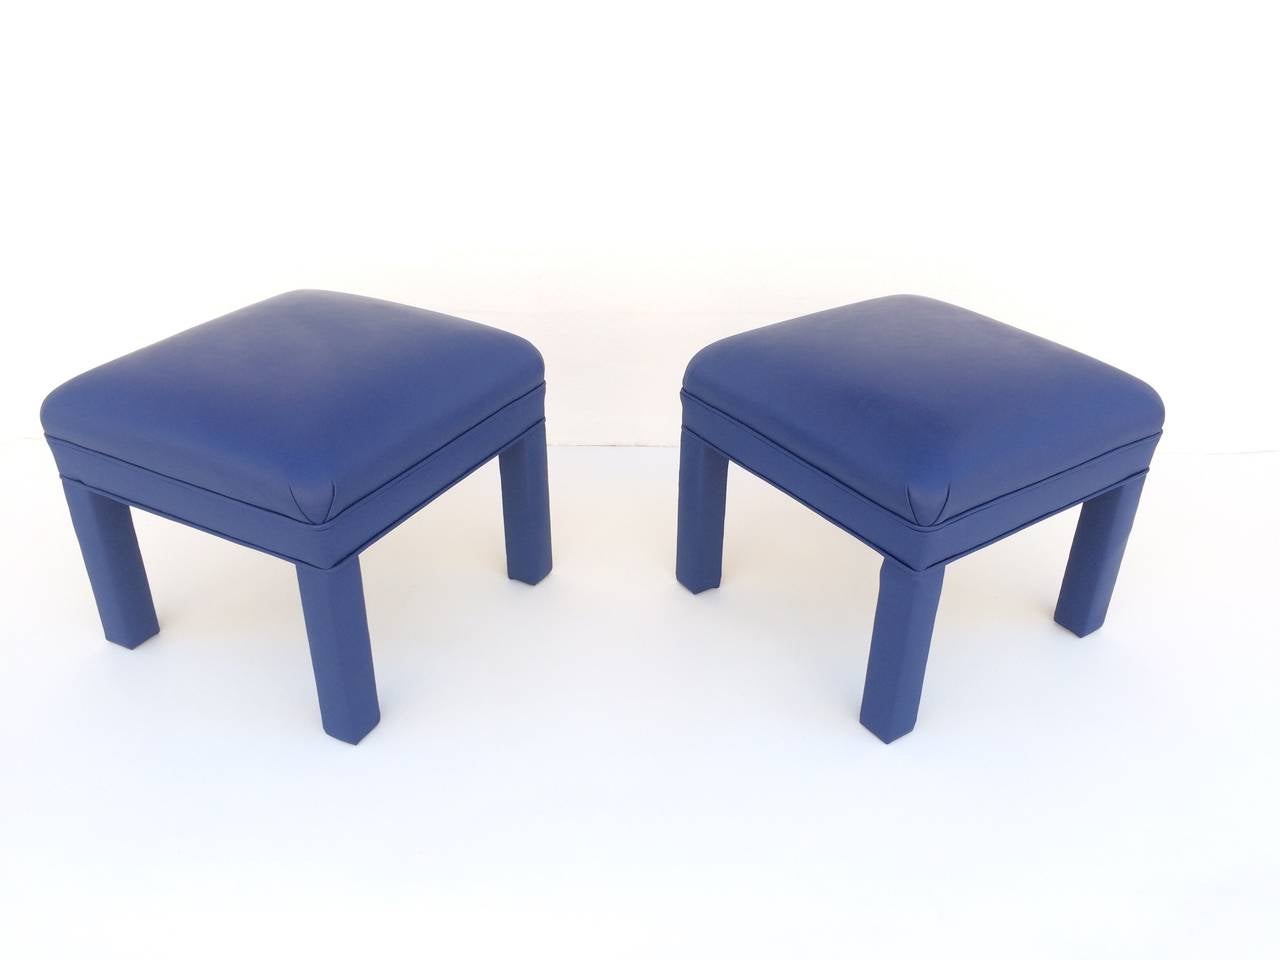 Pair of wood frame ottomans or small stools newly reupholster in a soft blue leather.